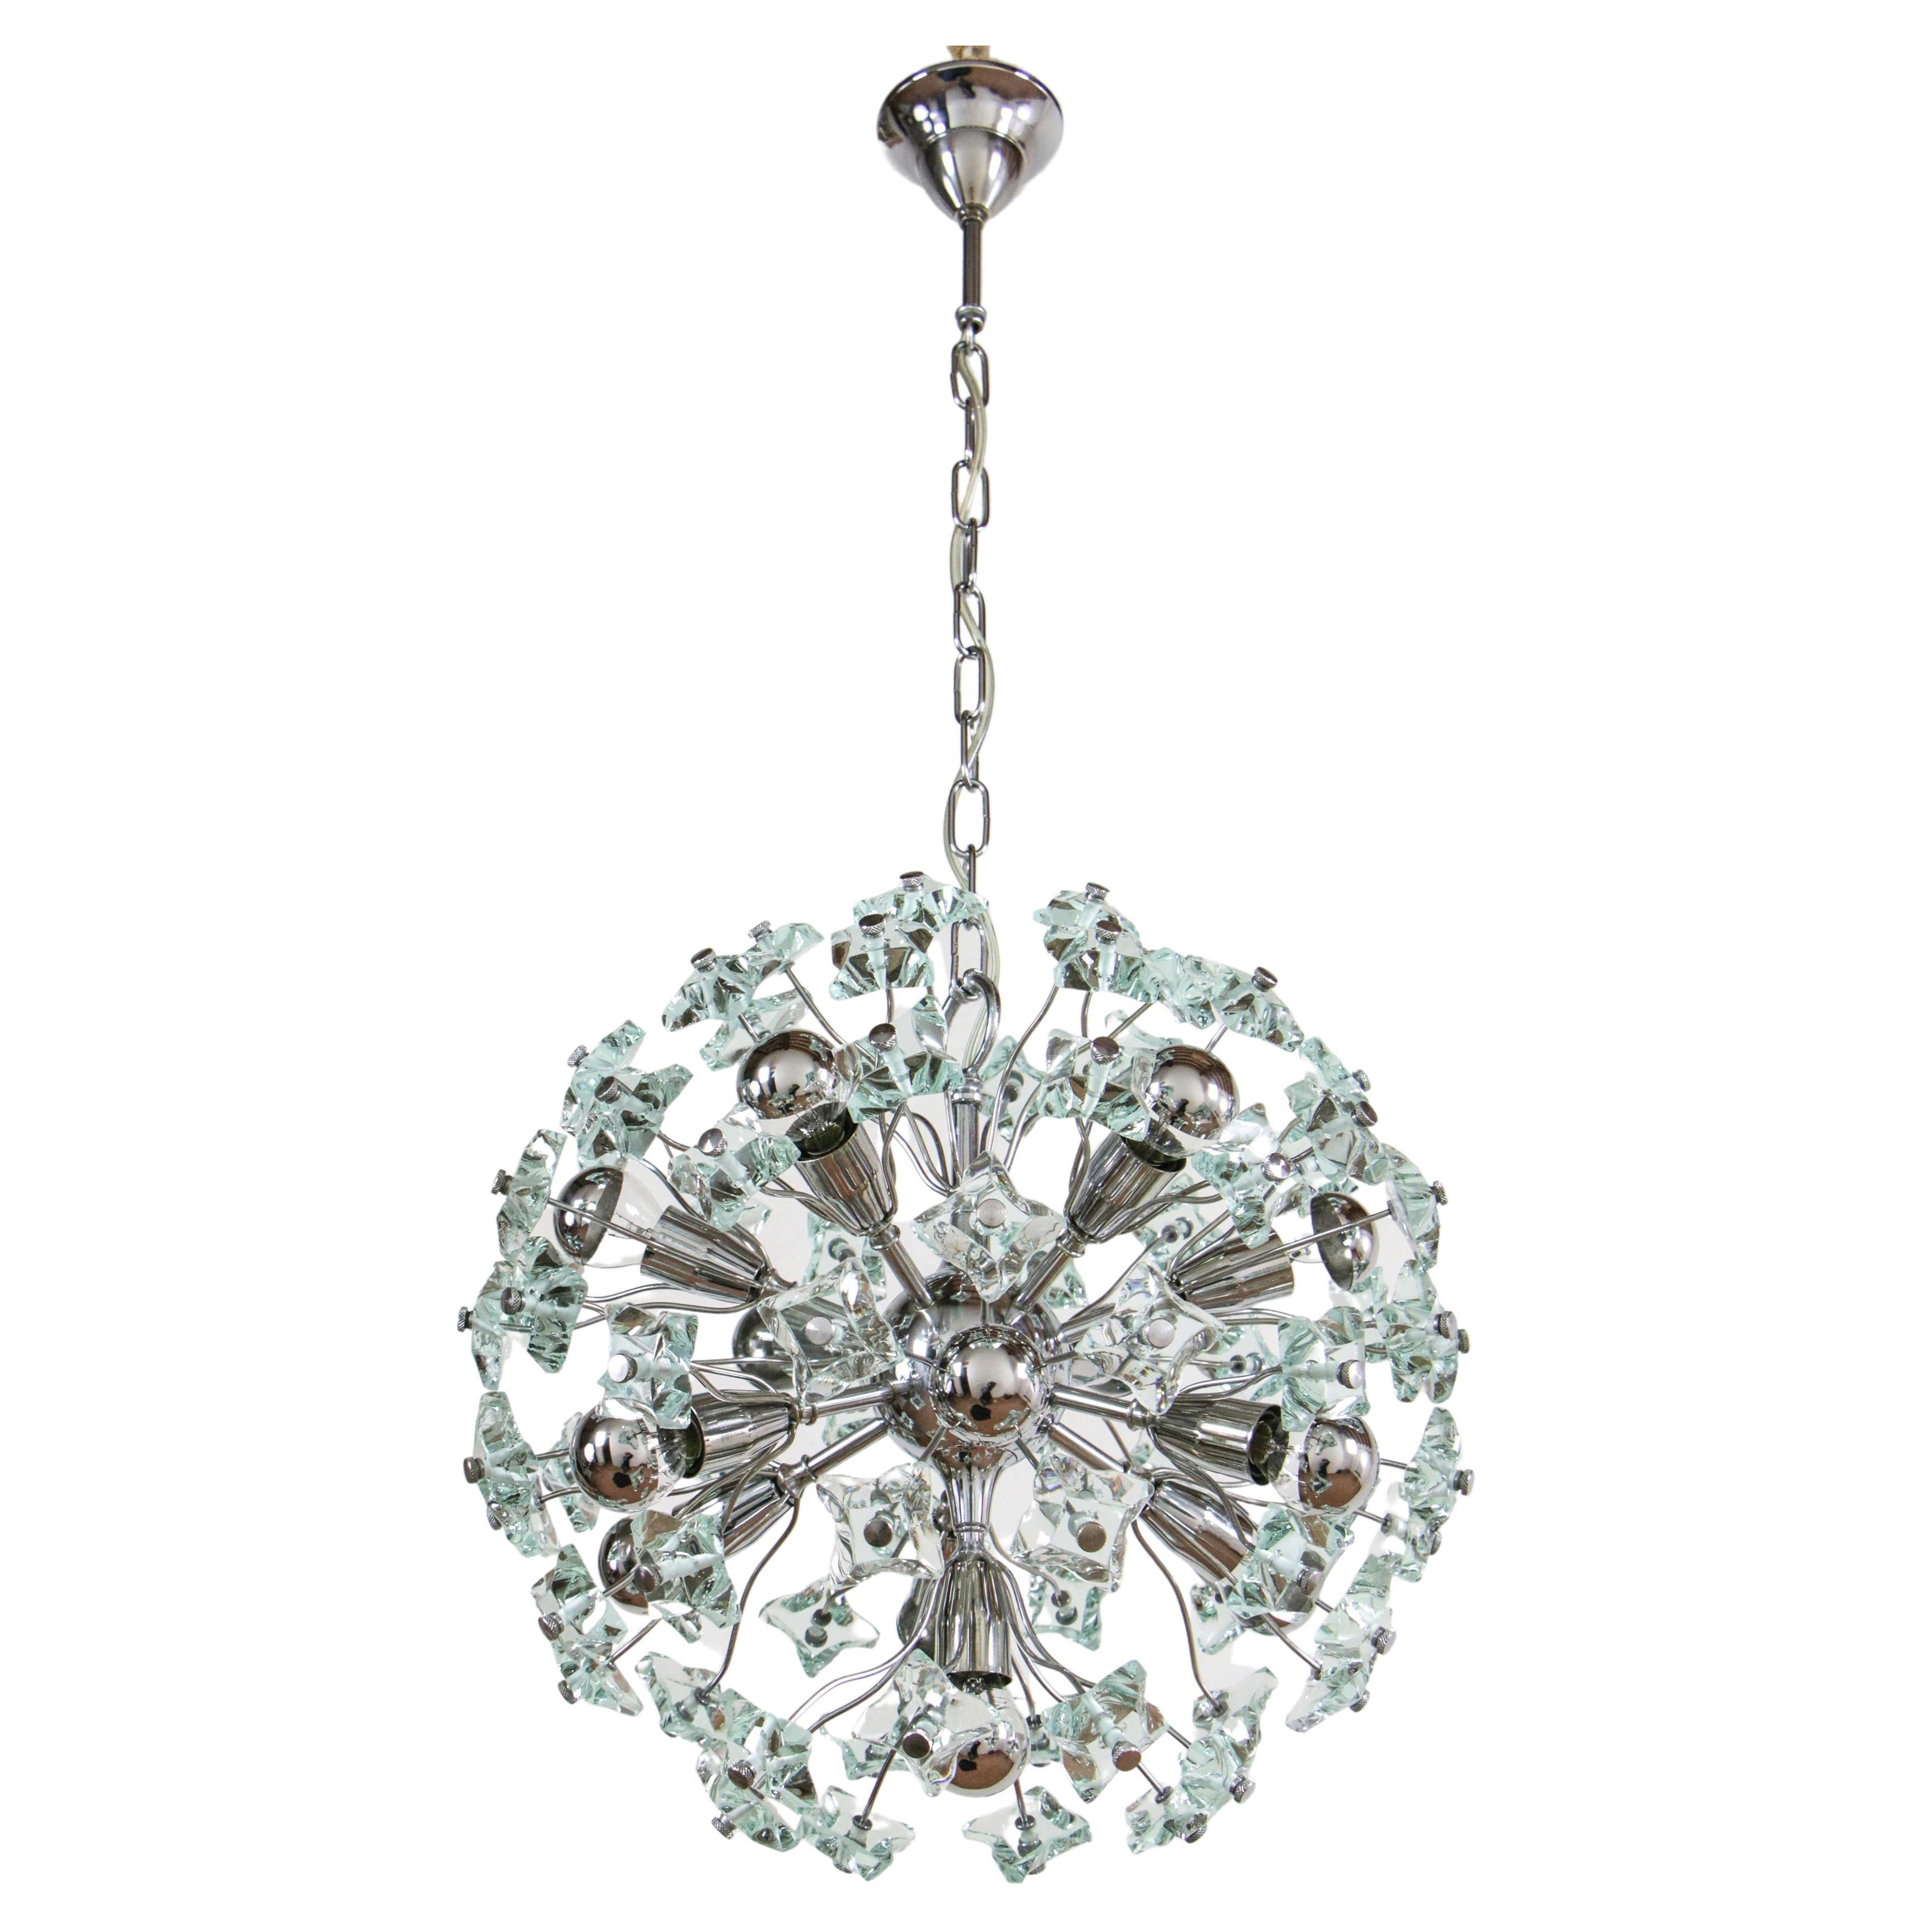 Beautiful Italian mid-century Sputnik chandelier attributed to Fontana Arte, from the 1960s. Crystal, chromed brass, 13 E14 lights. One of the rarest versions of this exquisite decorative item is here. The upper part of the crystals has been left